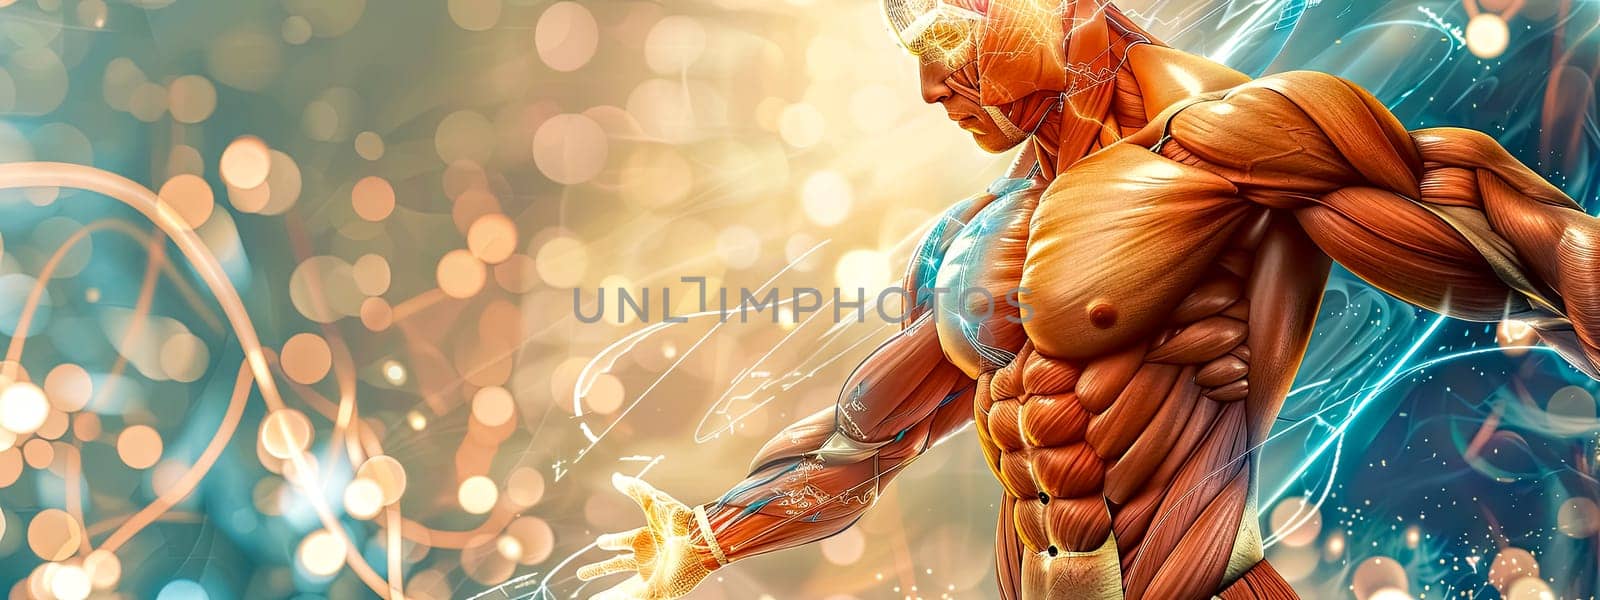 Digital artwork of a muscular superhero with electric powers ready for battle